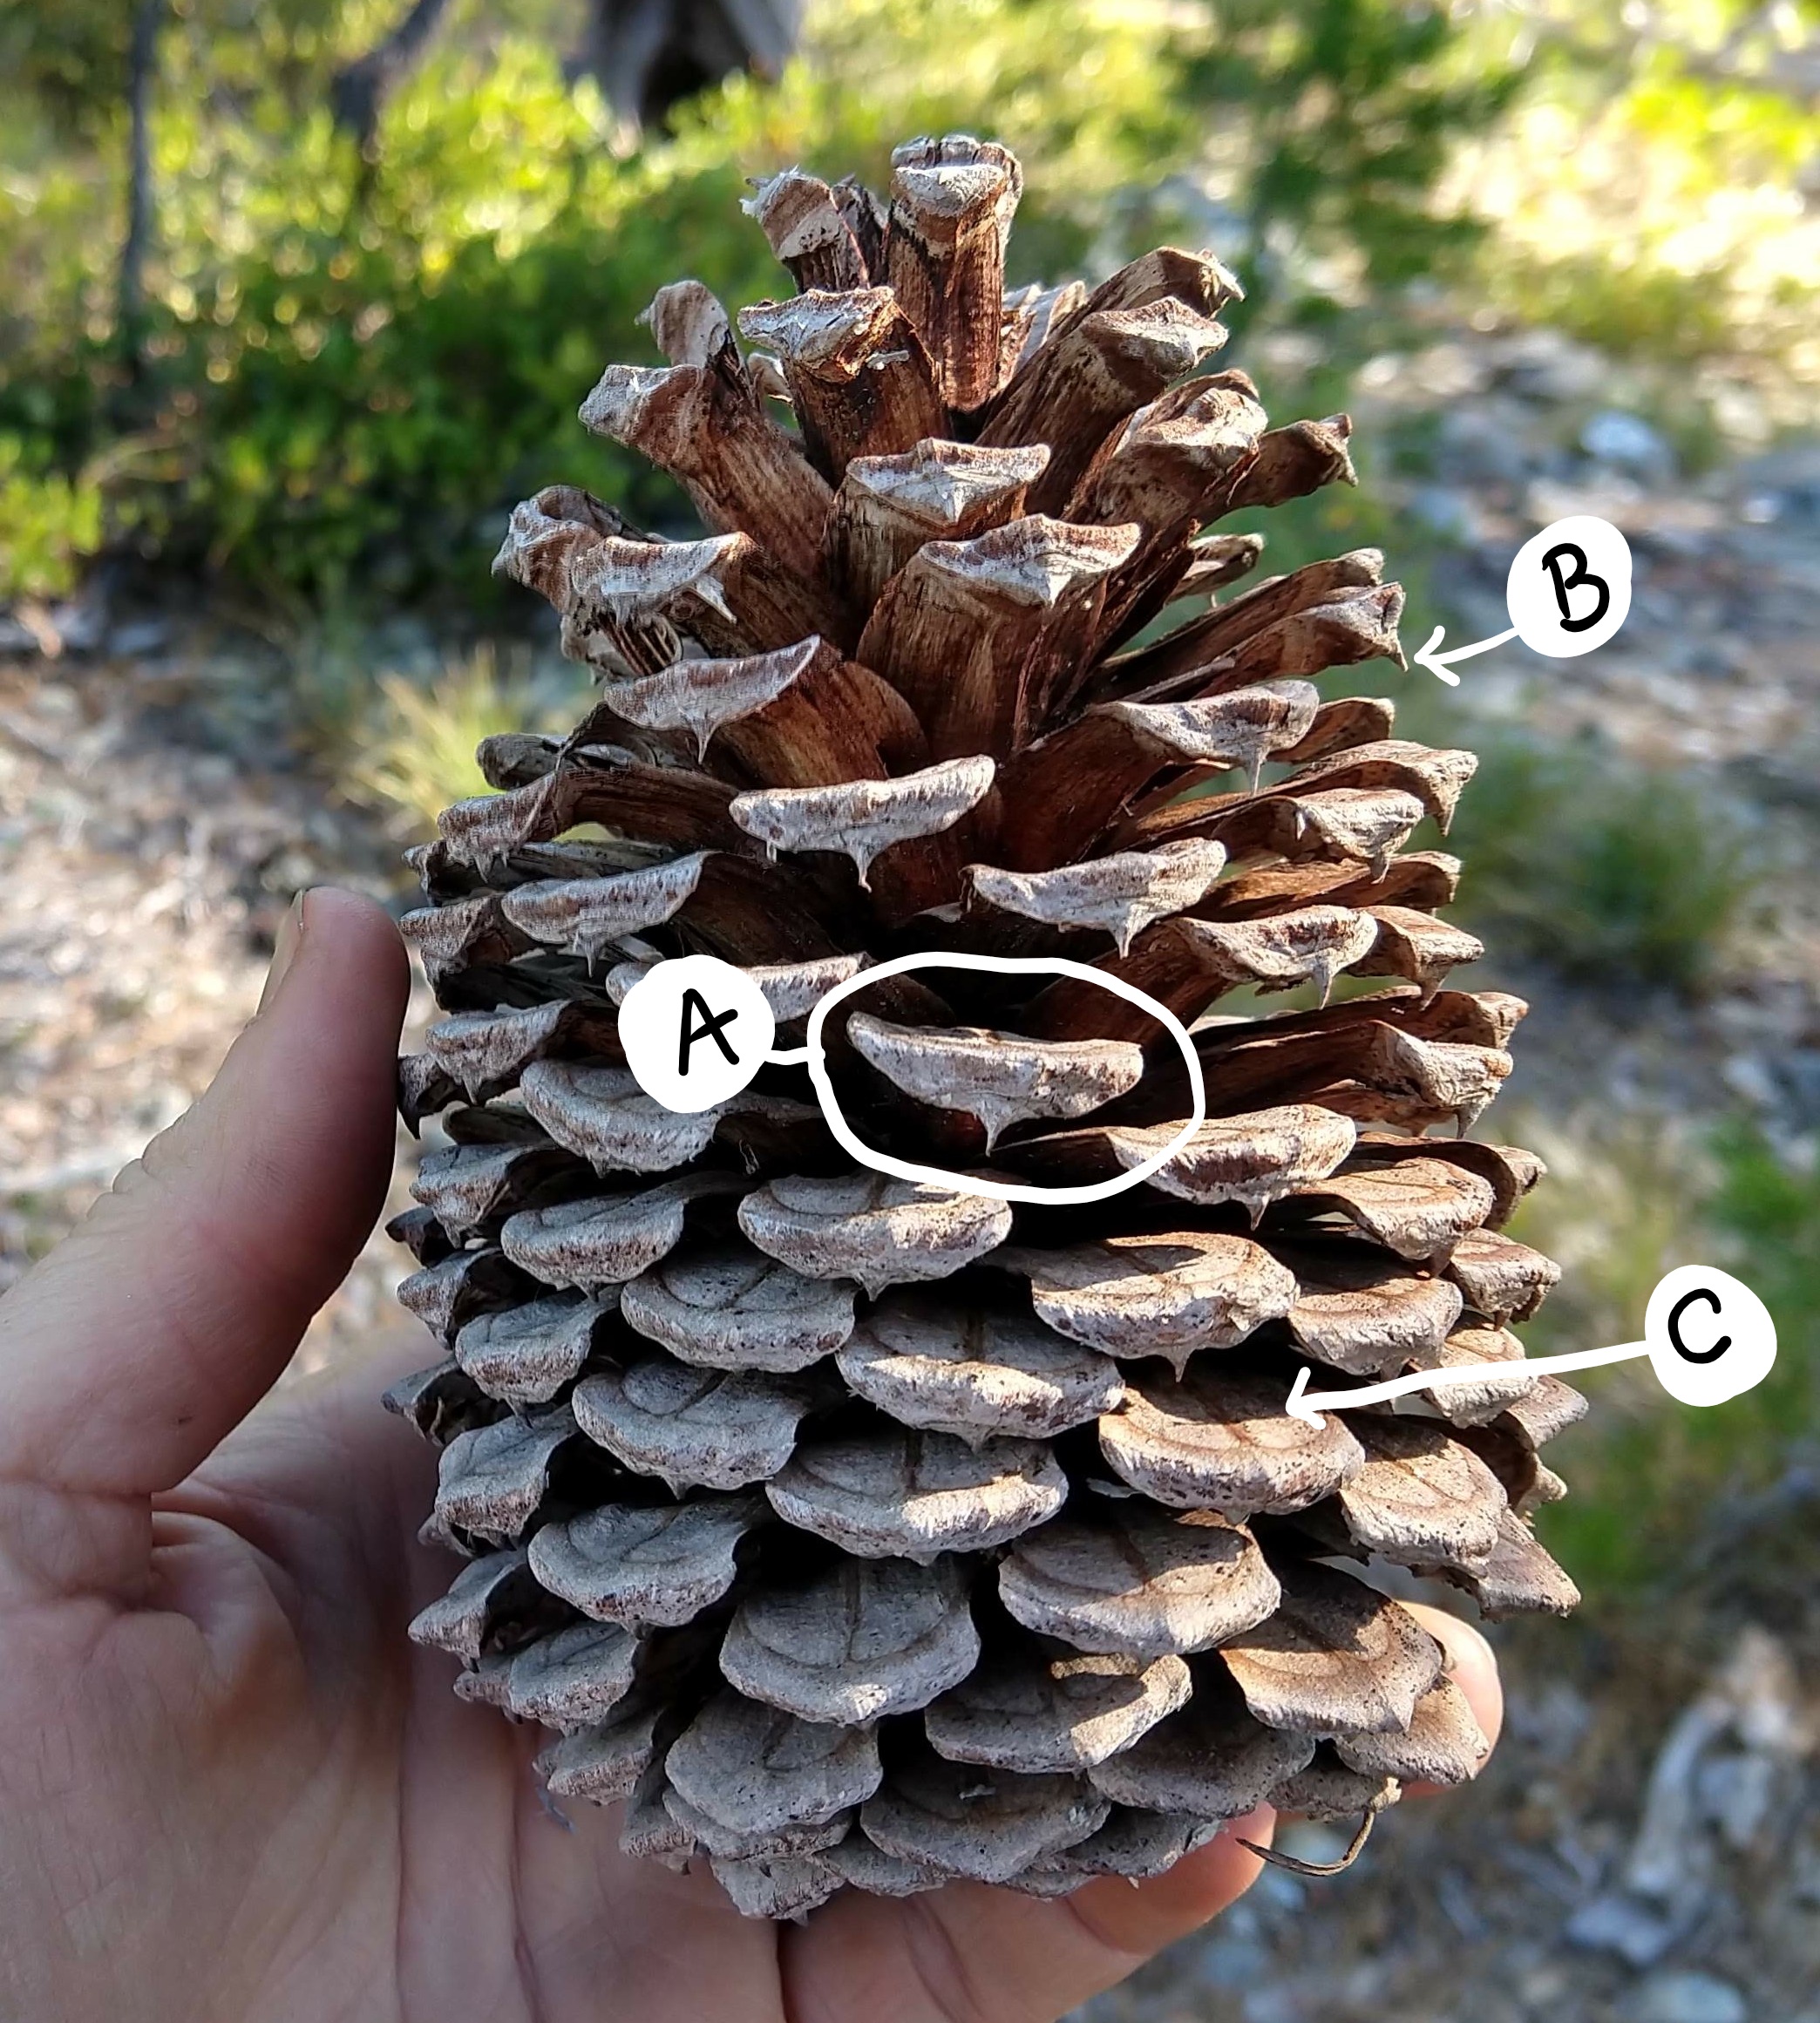 A jefferey pine seed cone